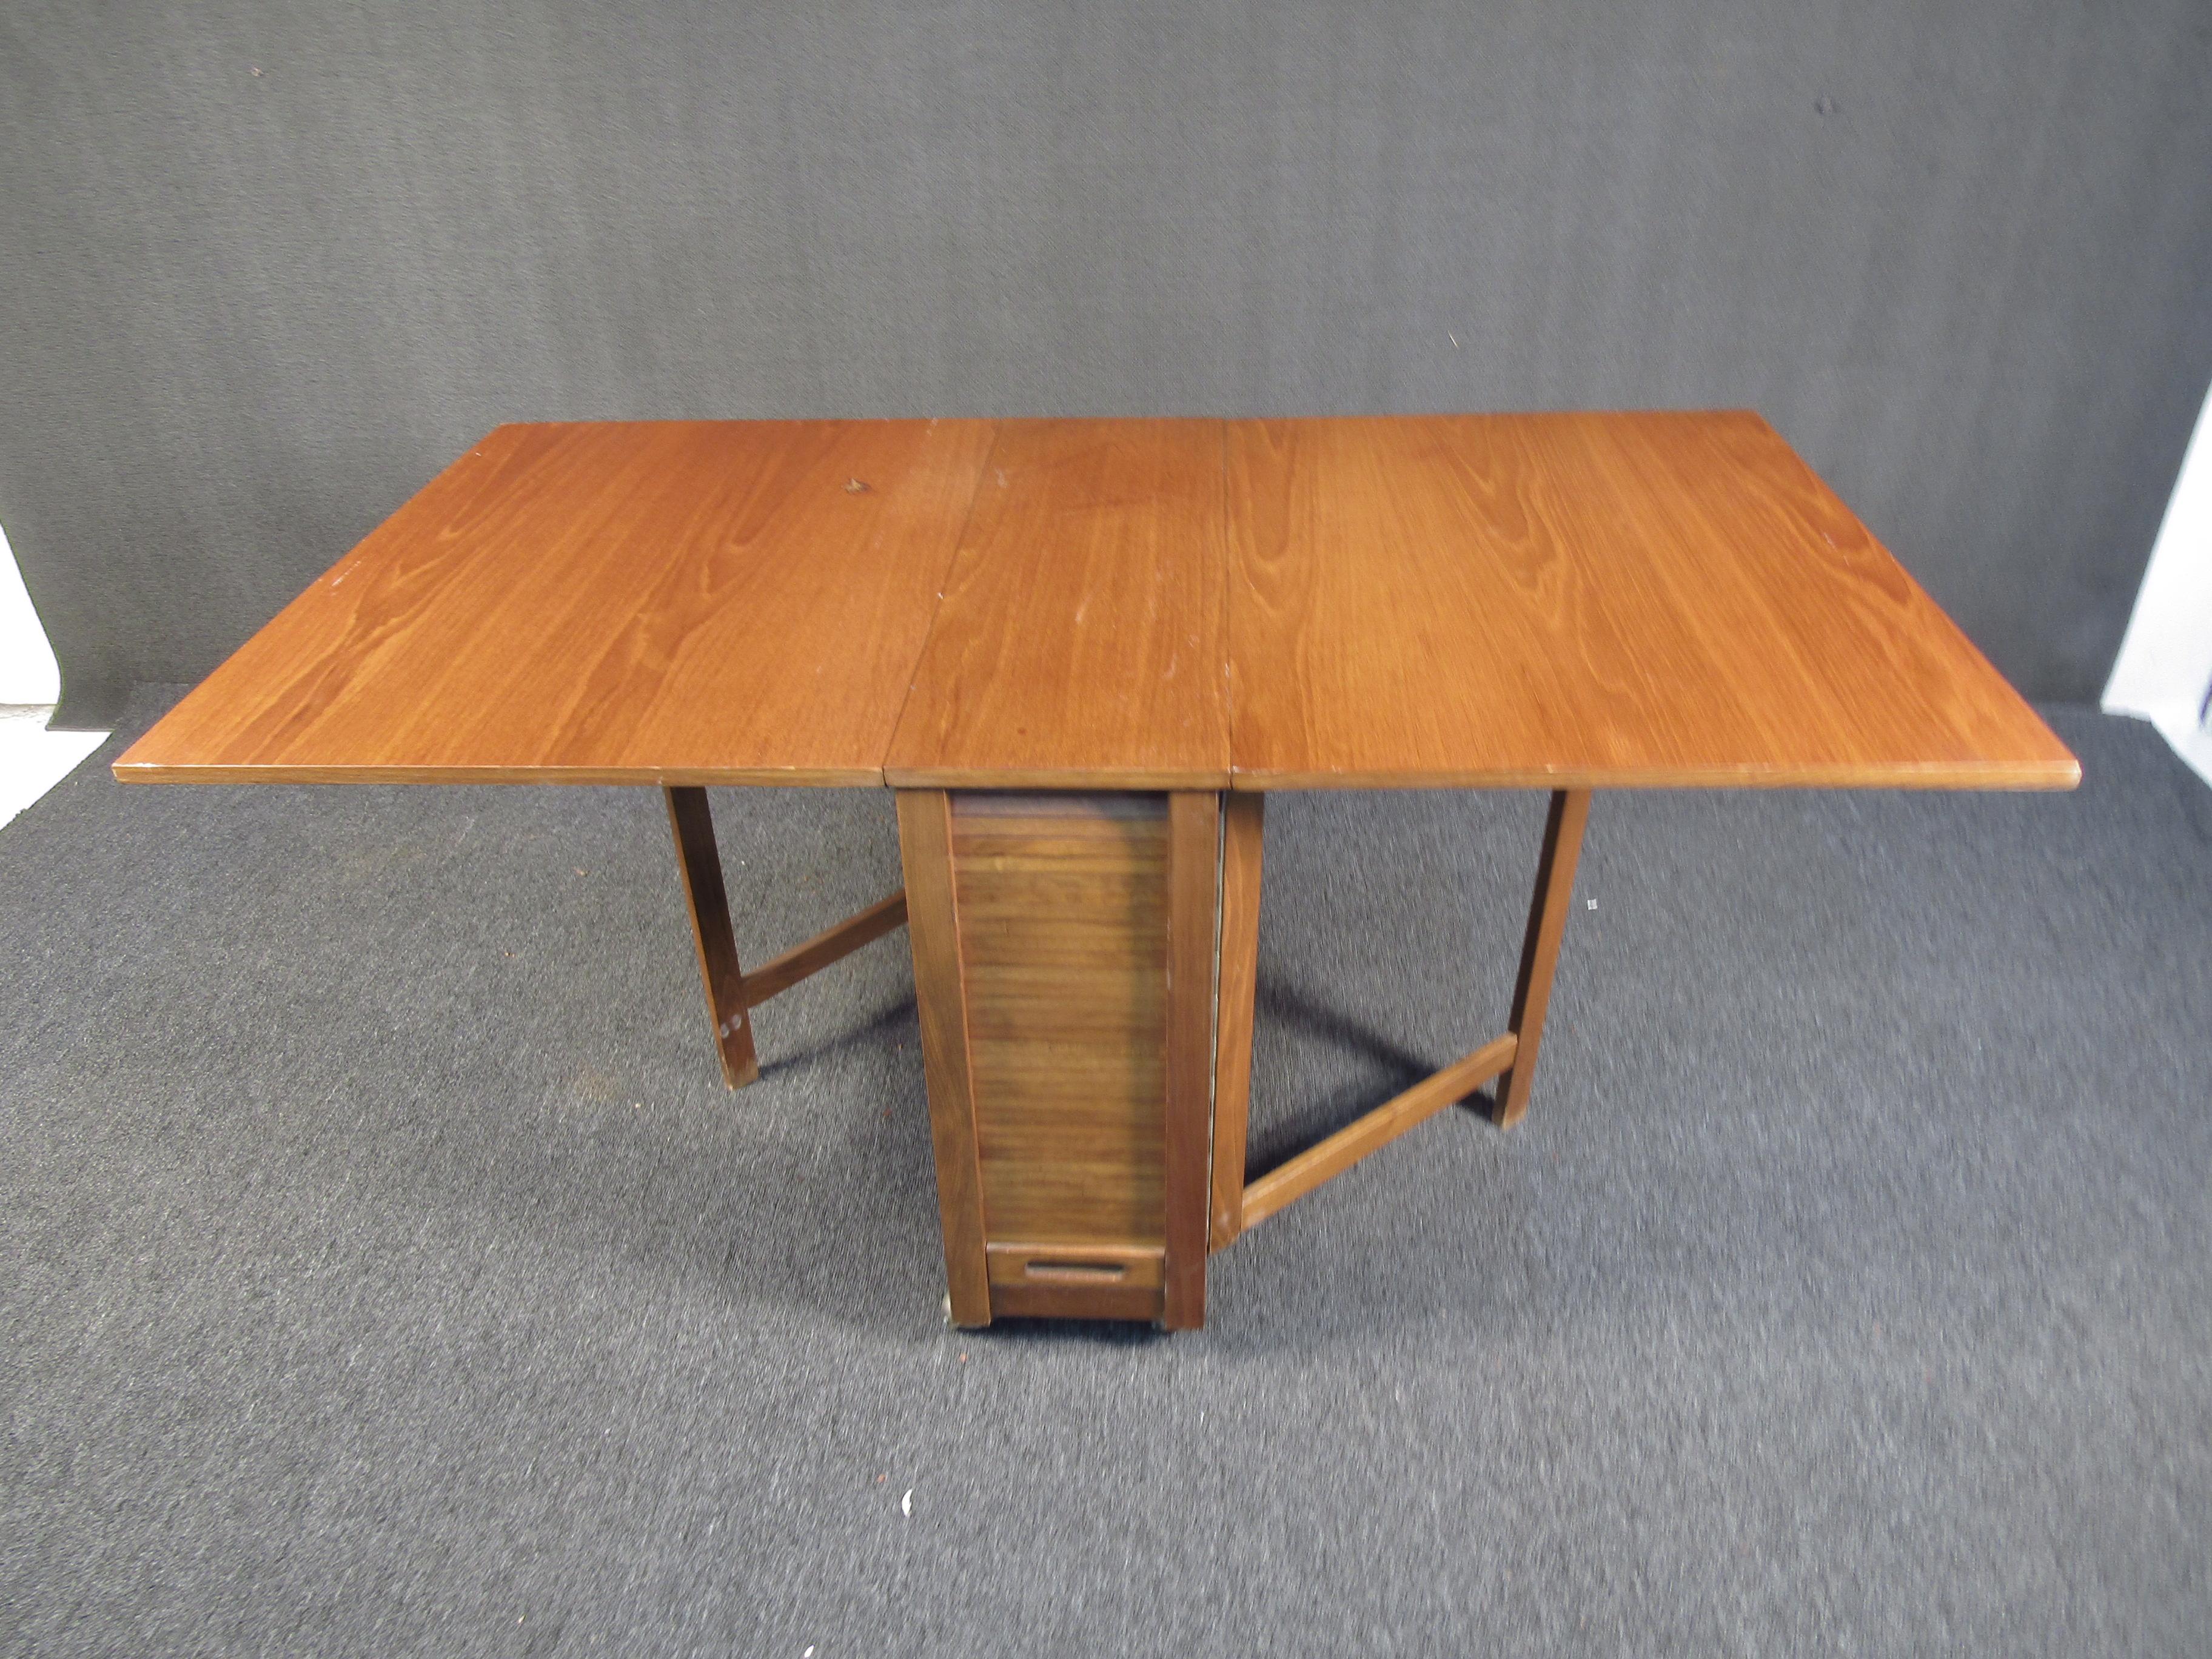 Stunning Teak Midcentury Drop Leaf Table with Chairs 2